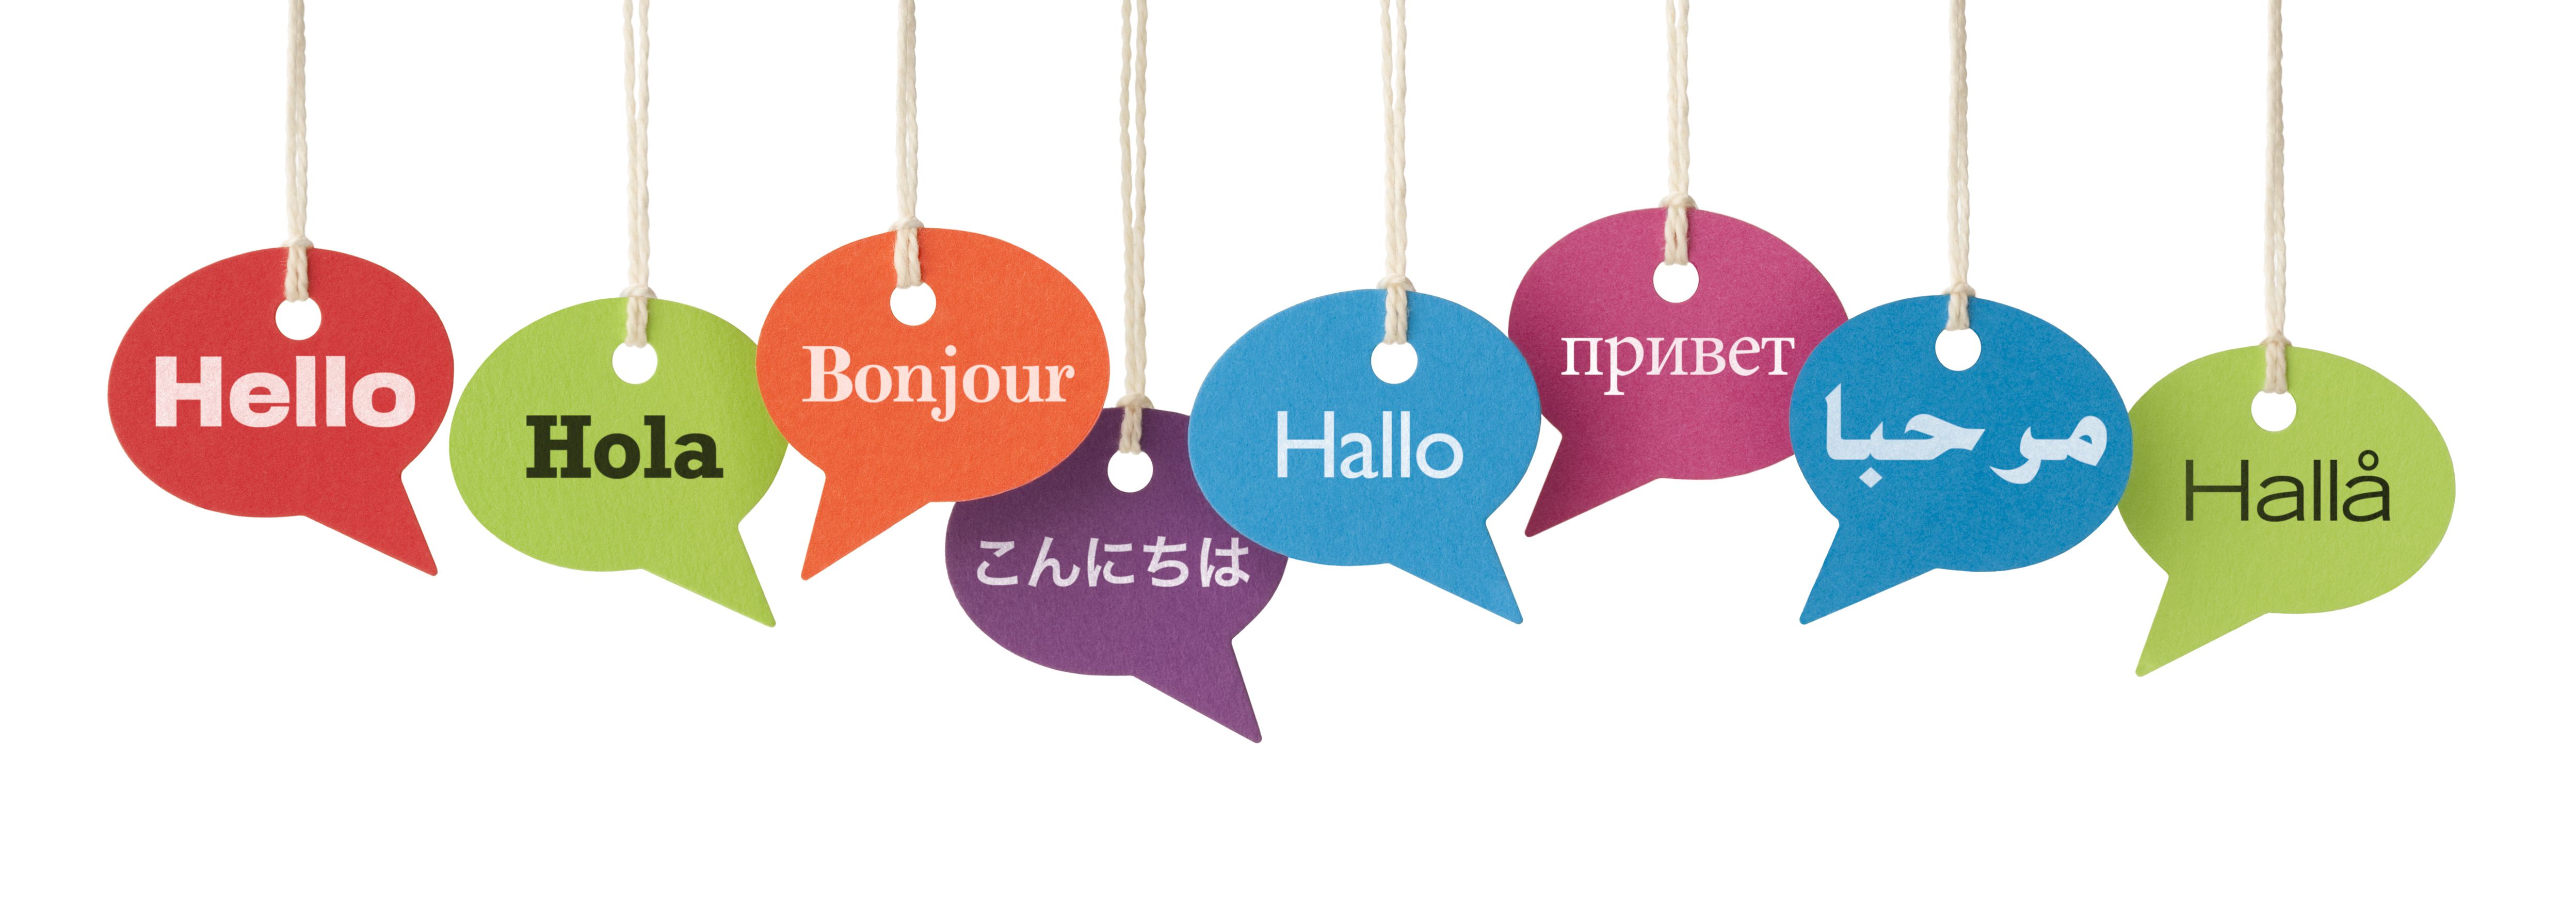 How to Change Your Facebook Language Settings